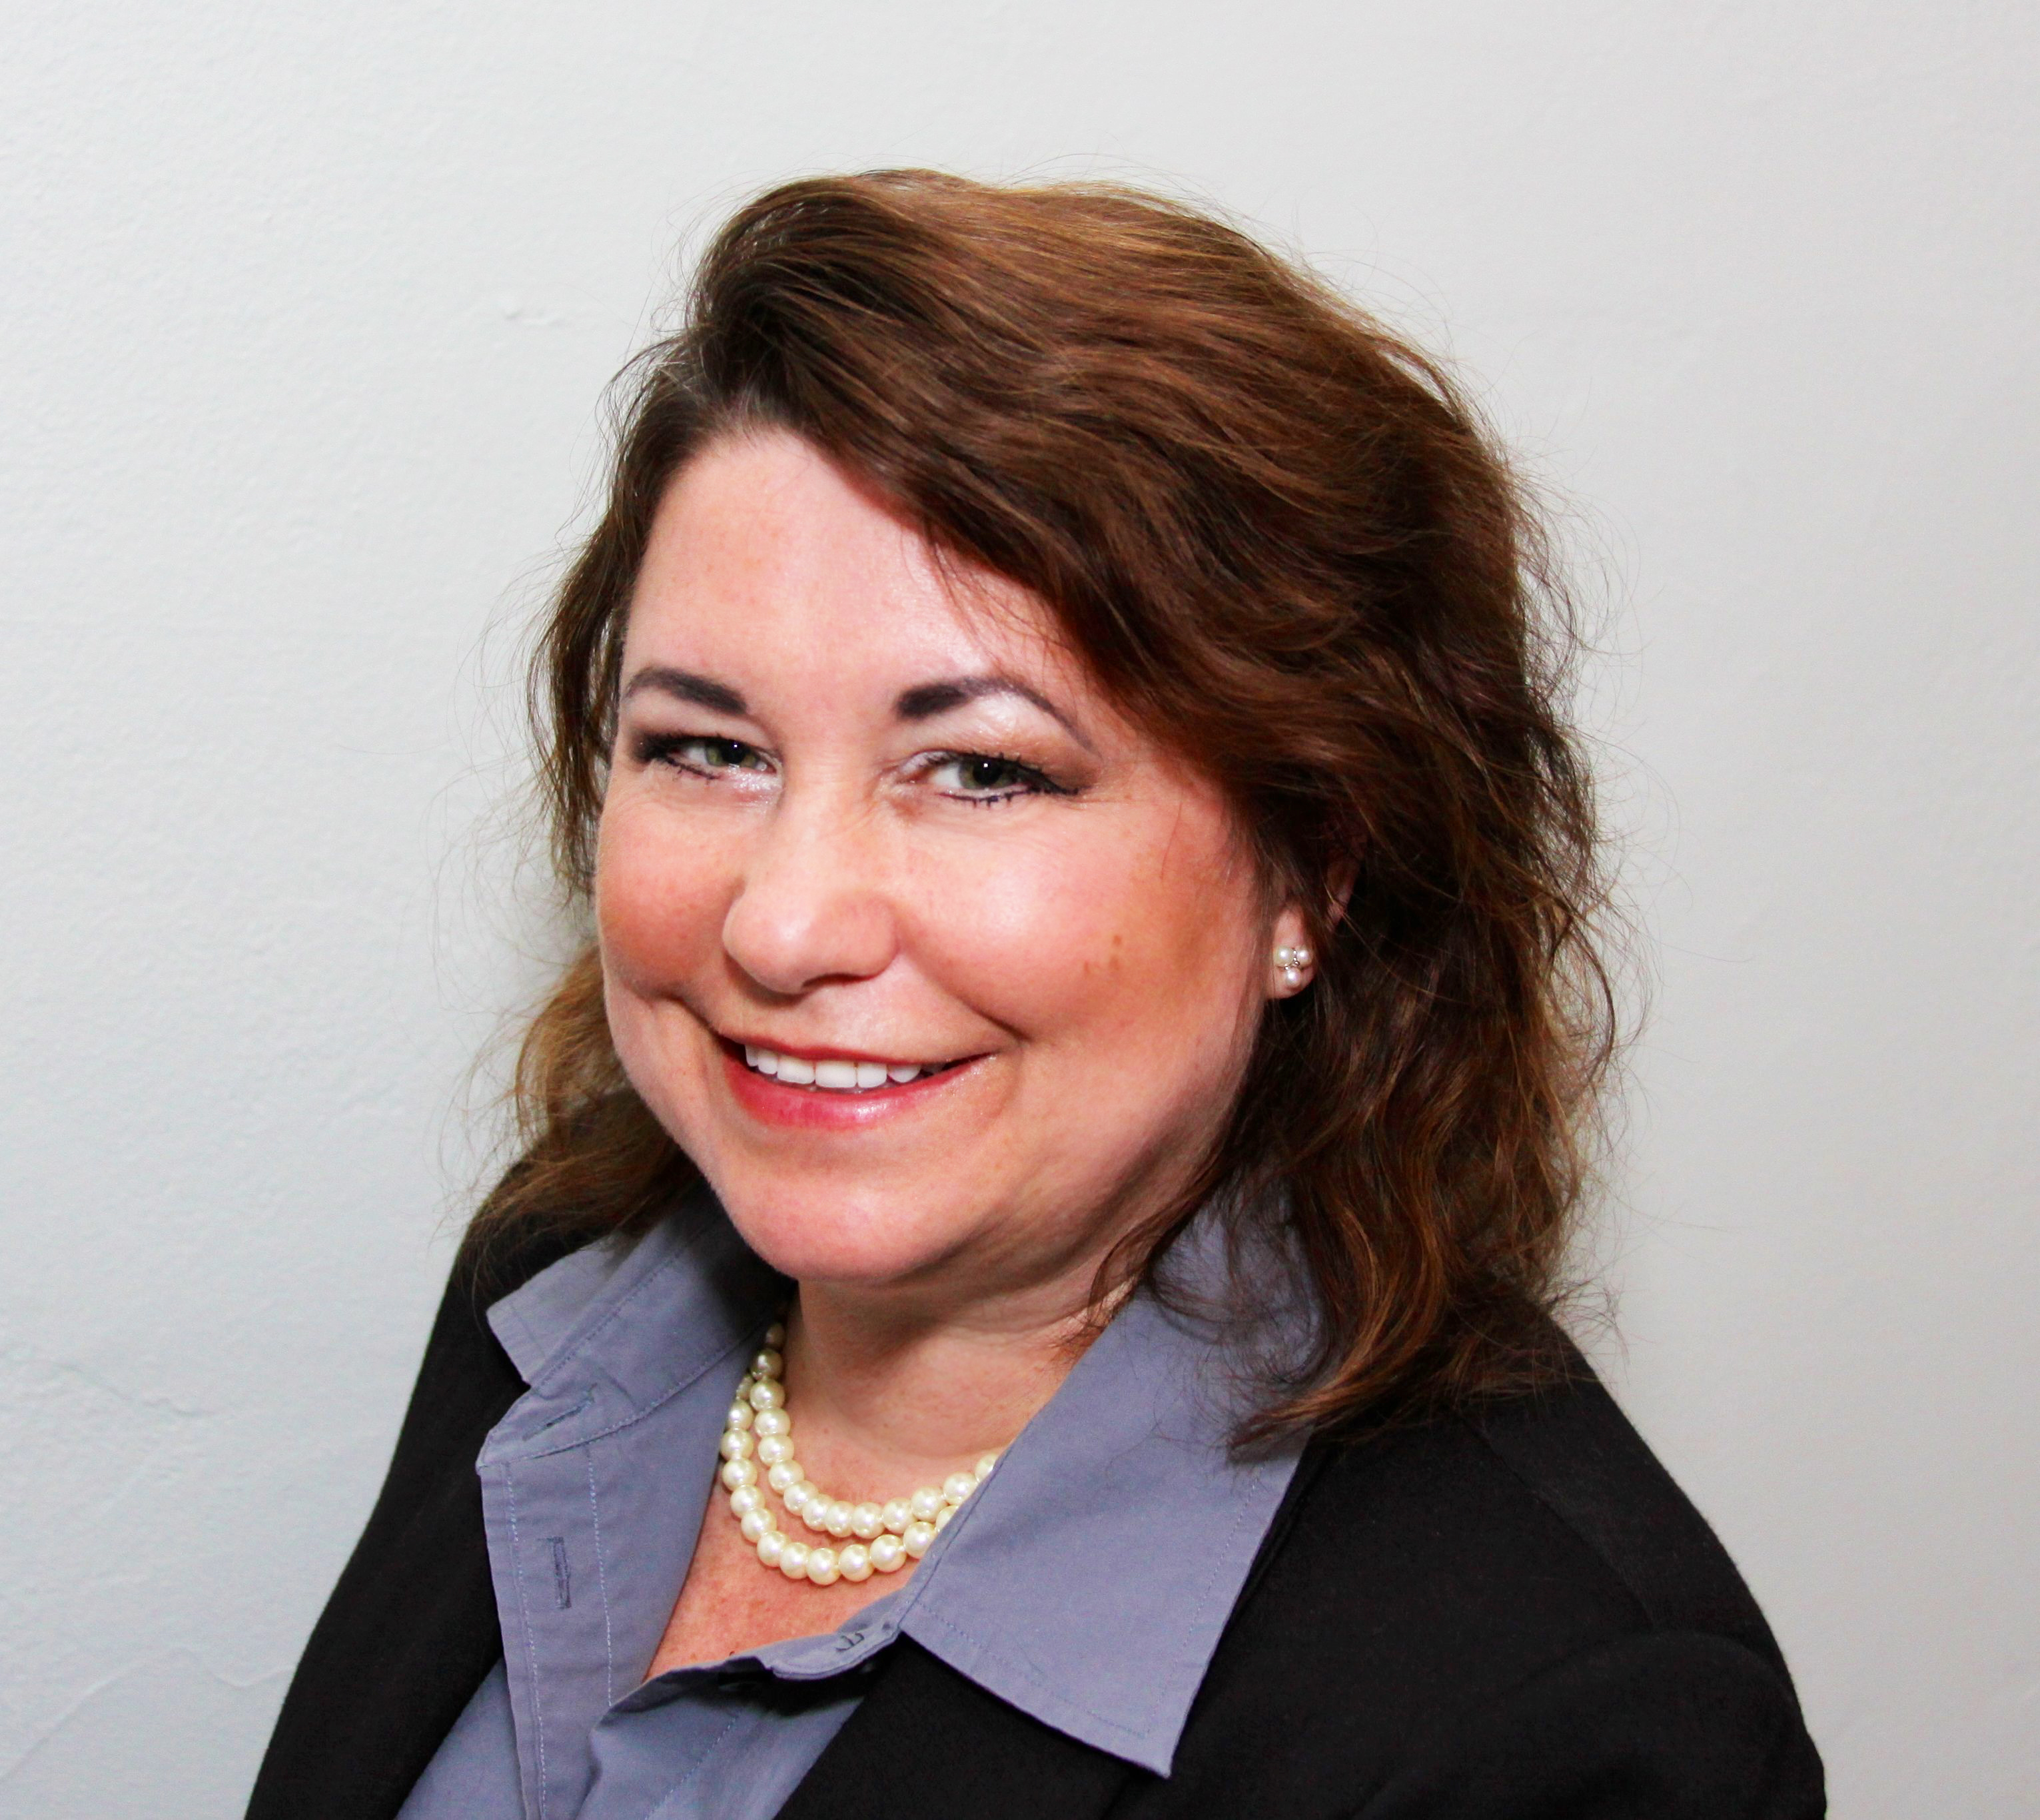 Rosemarie Savino, former ShoreTel executive, has joined Fonality as vice president of product management